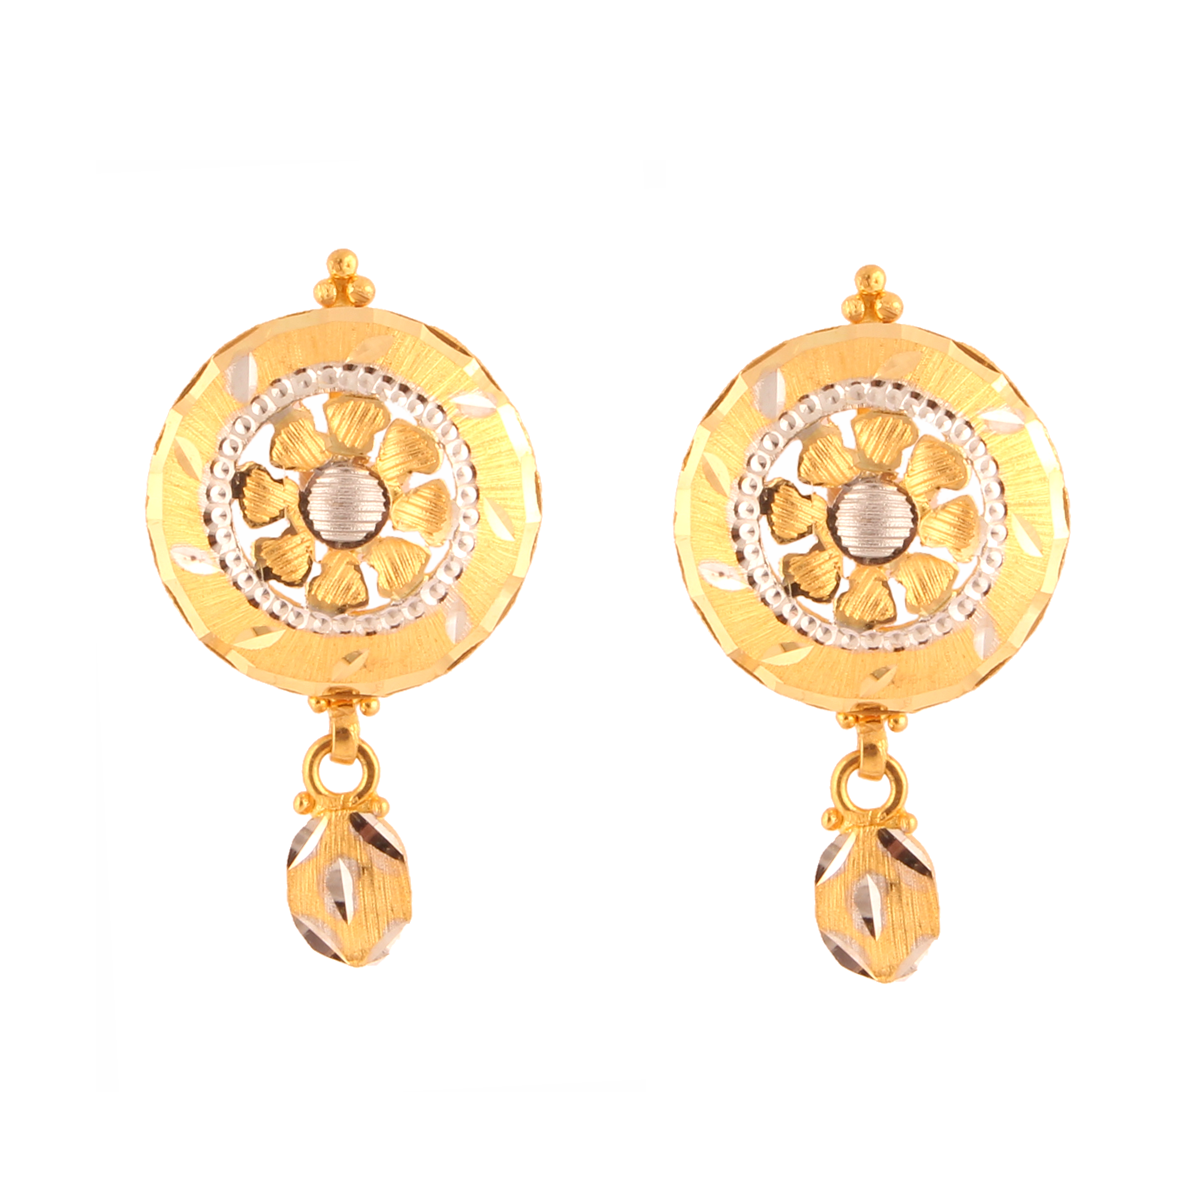 Buy Gold Earrings in Pune | P N Gadgil and sons | Gold earrings designs,  Wholesale gold jewelry, Gold necklace designs